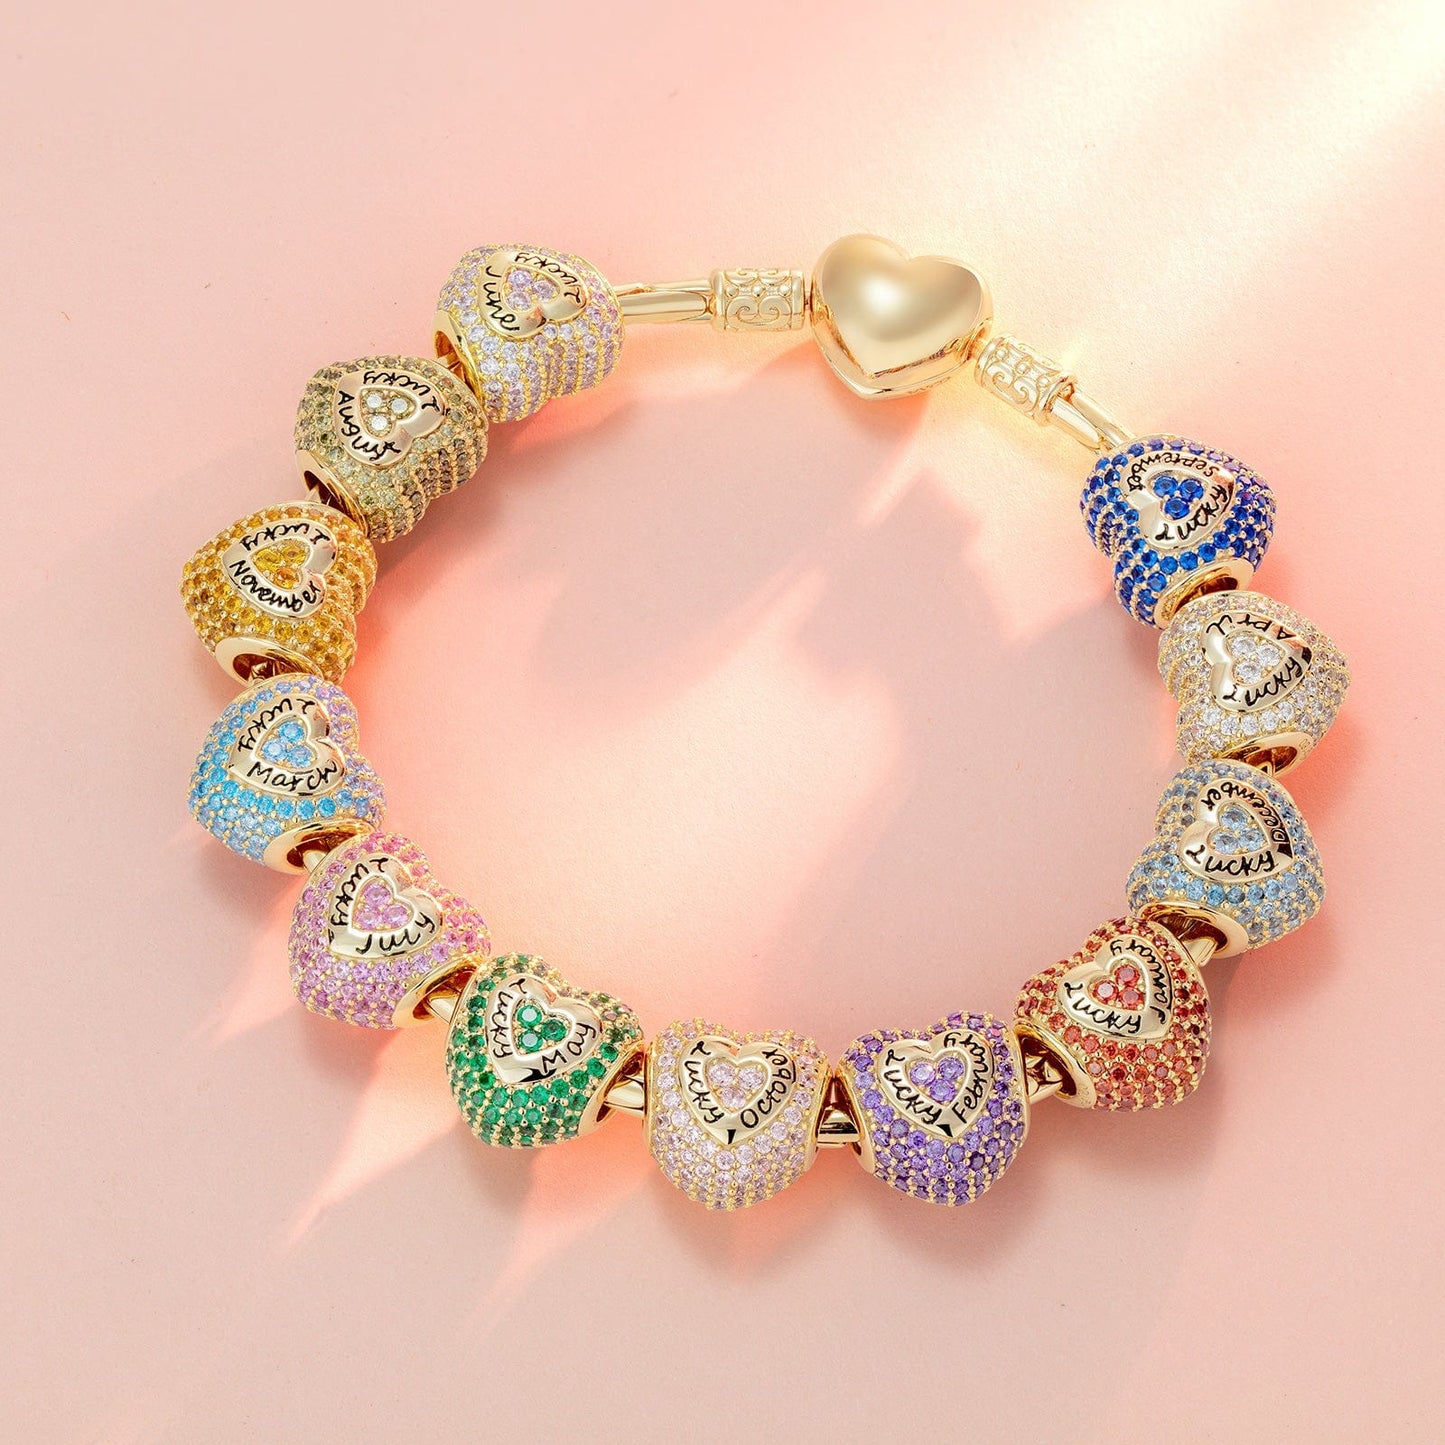 August Love Heart Birthstone Tarnish-resistant Silver Charms With Enamel In 14K Gold Plated